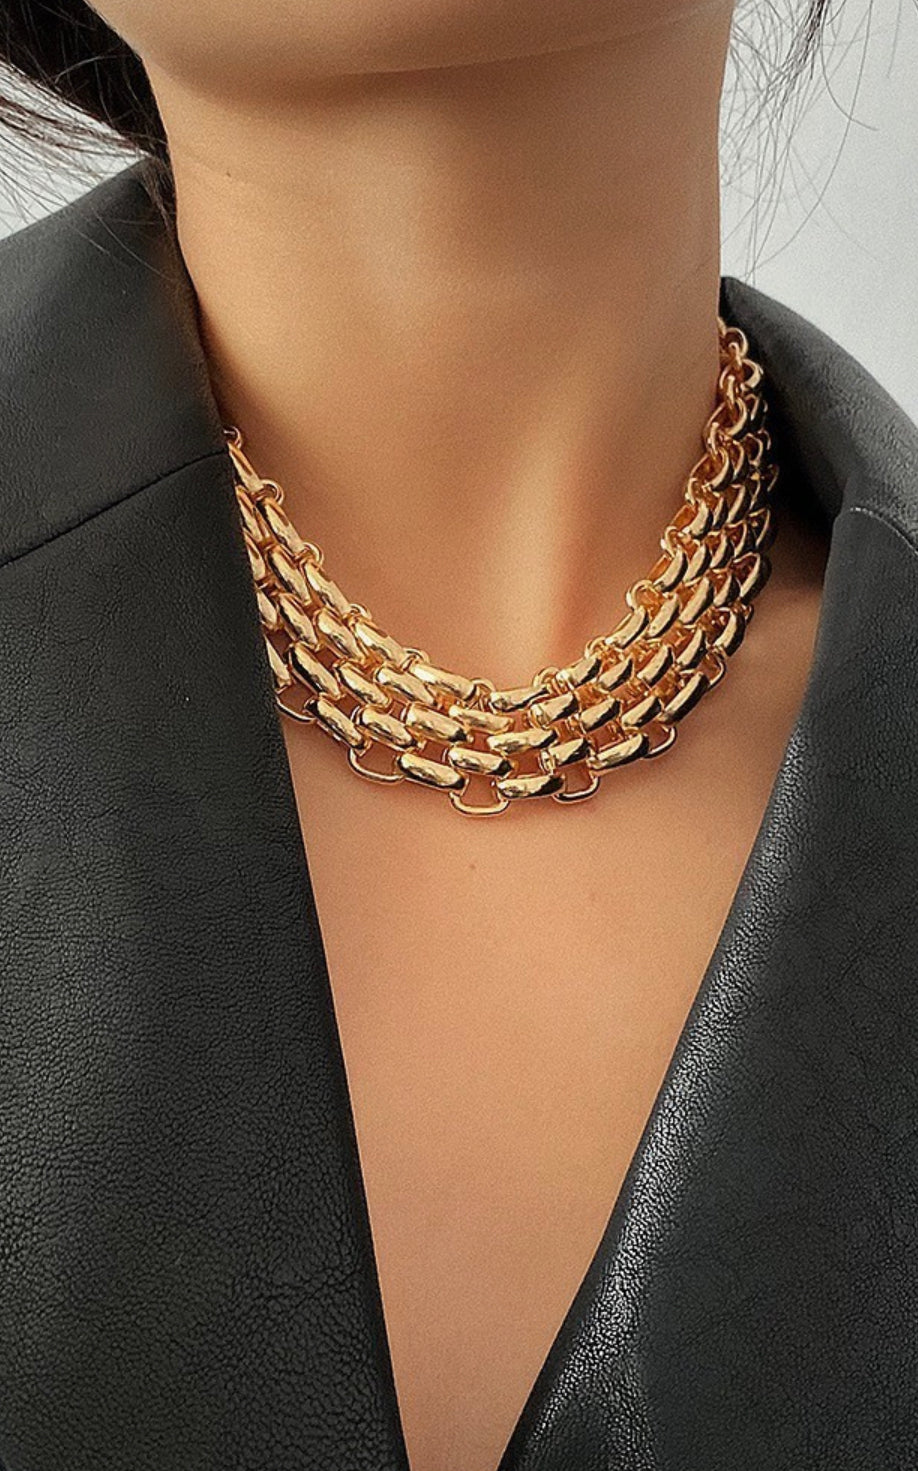 Layered gold chain necklace